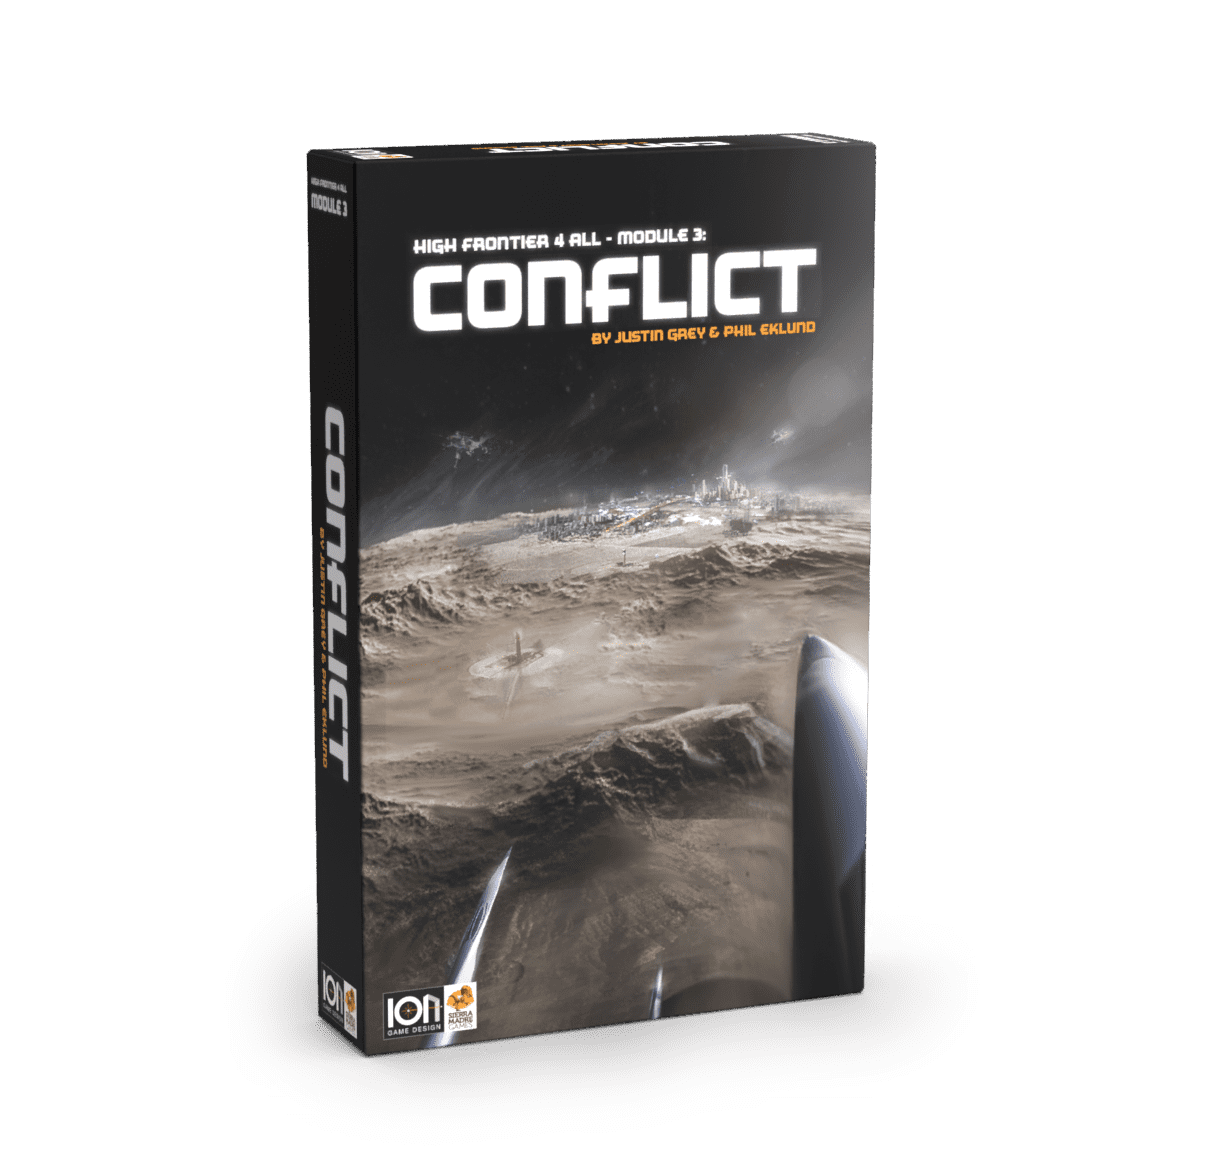 High Frontier 4 [Module 3] - Conflict Add-on (RETAIL)